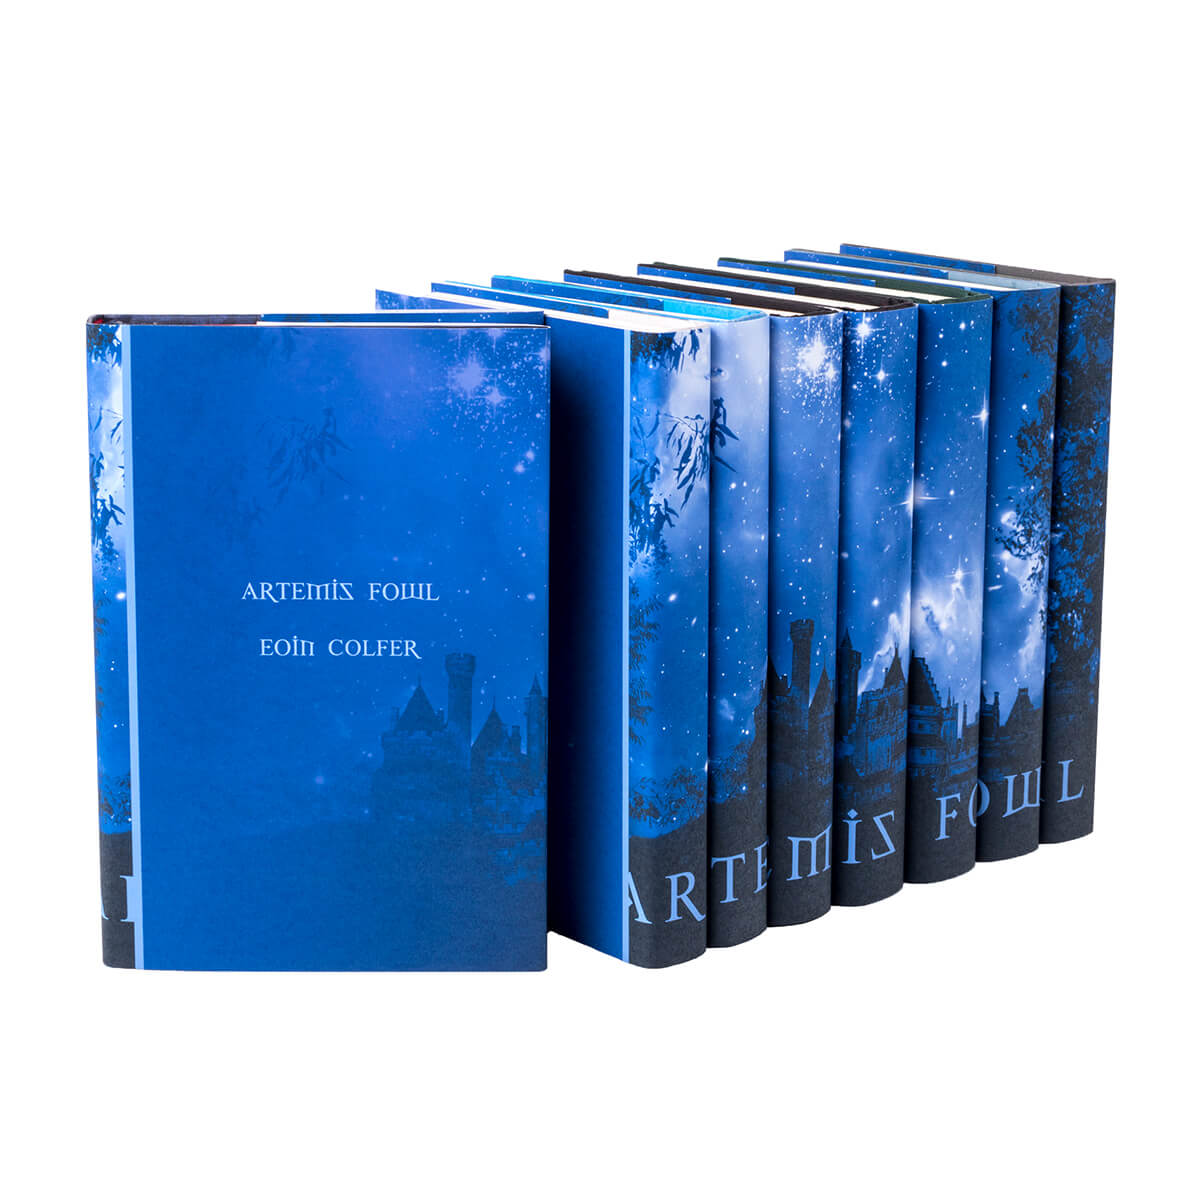 Artemis Fowl book 2-7 hardcover bundle first edition by Eoin Colfer,  Hardcover